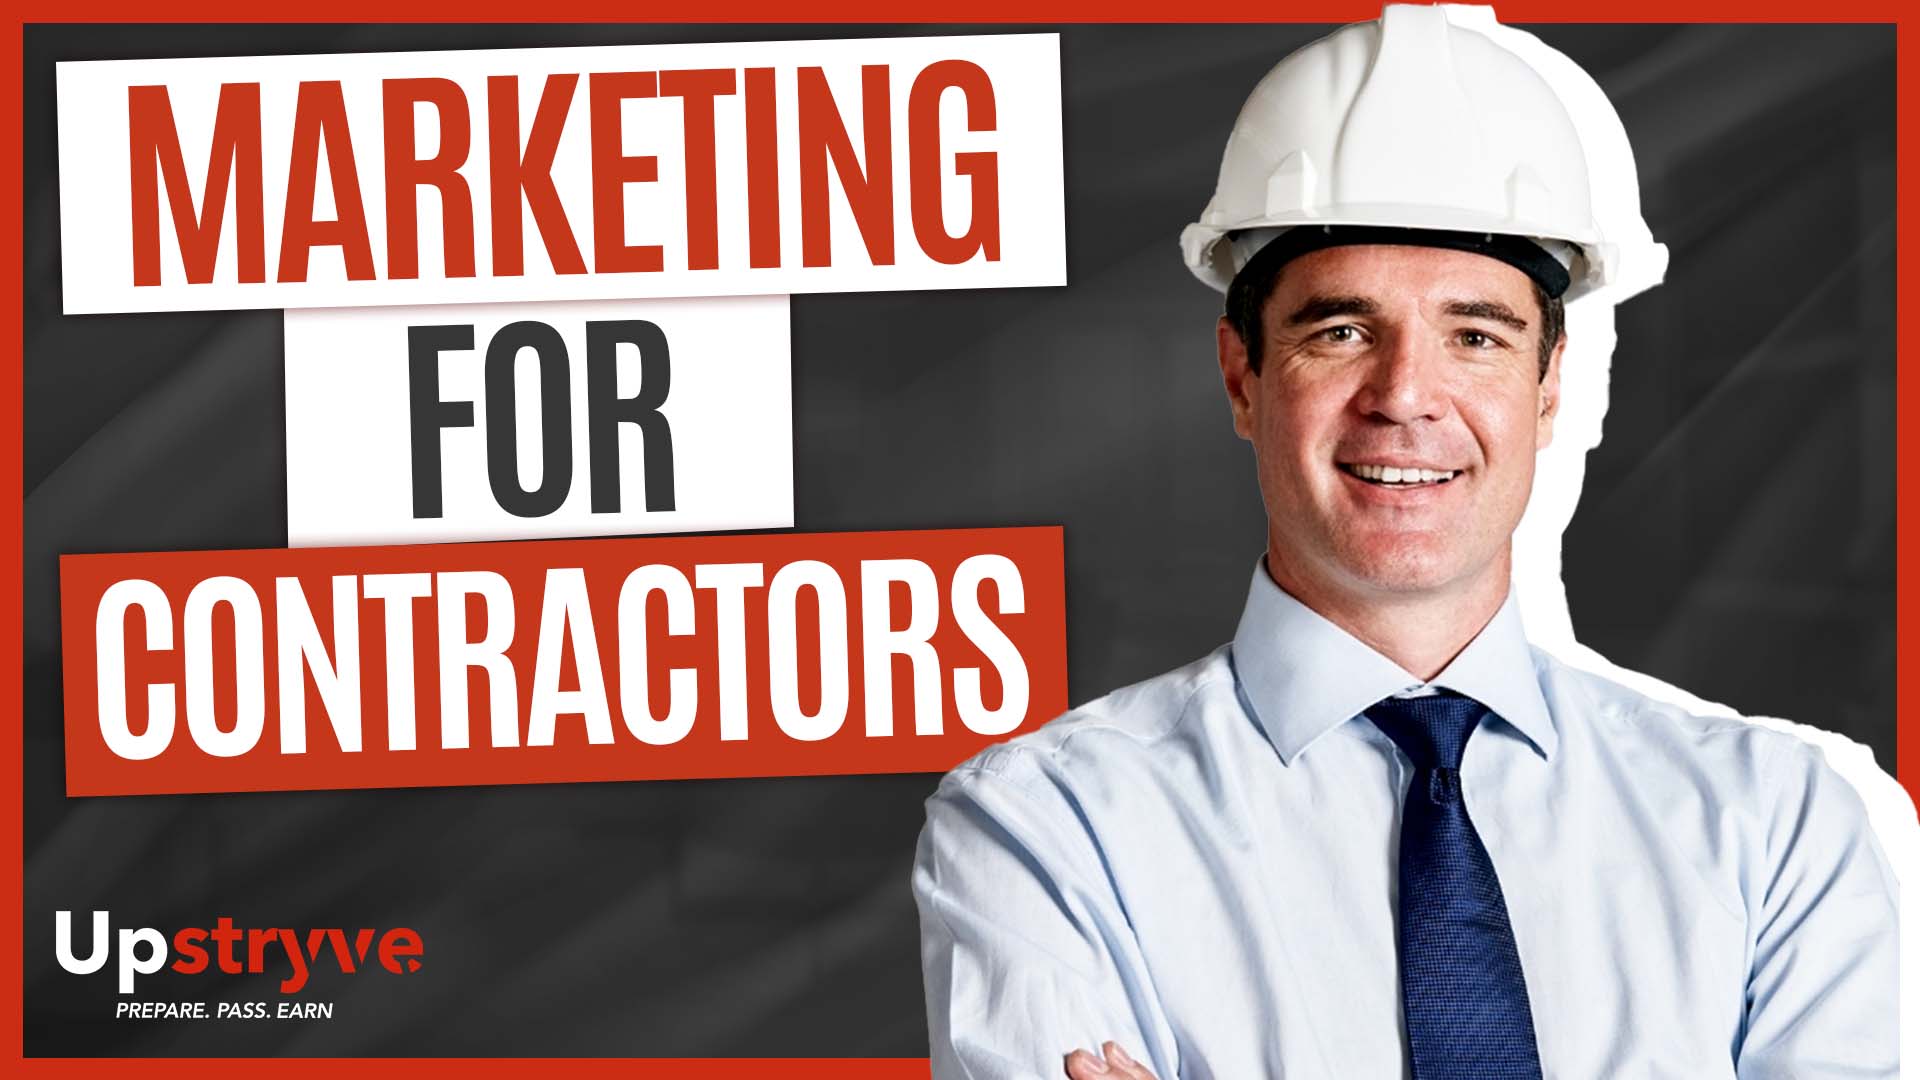 Is Marketing Important When Scaling A Contractor Business? In today's video contractor, developer, builder and entrepreneur Hugo Villegas explains why marketing is so important when scaling your contractor business. Marketing for contractors is often overlooked which is a big mistake. Let's just say your profit depends on it. Leave us a comment below with what you think and let us know if you have any questions.